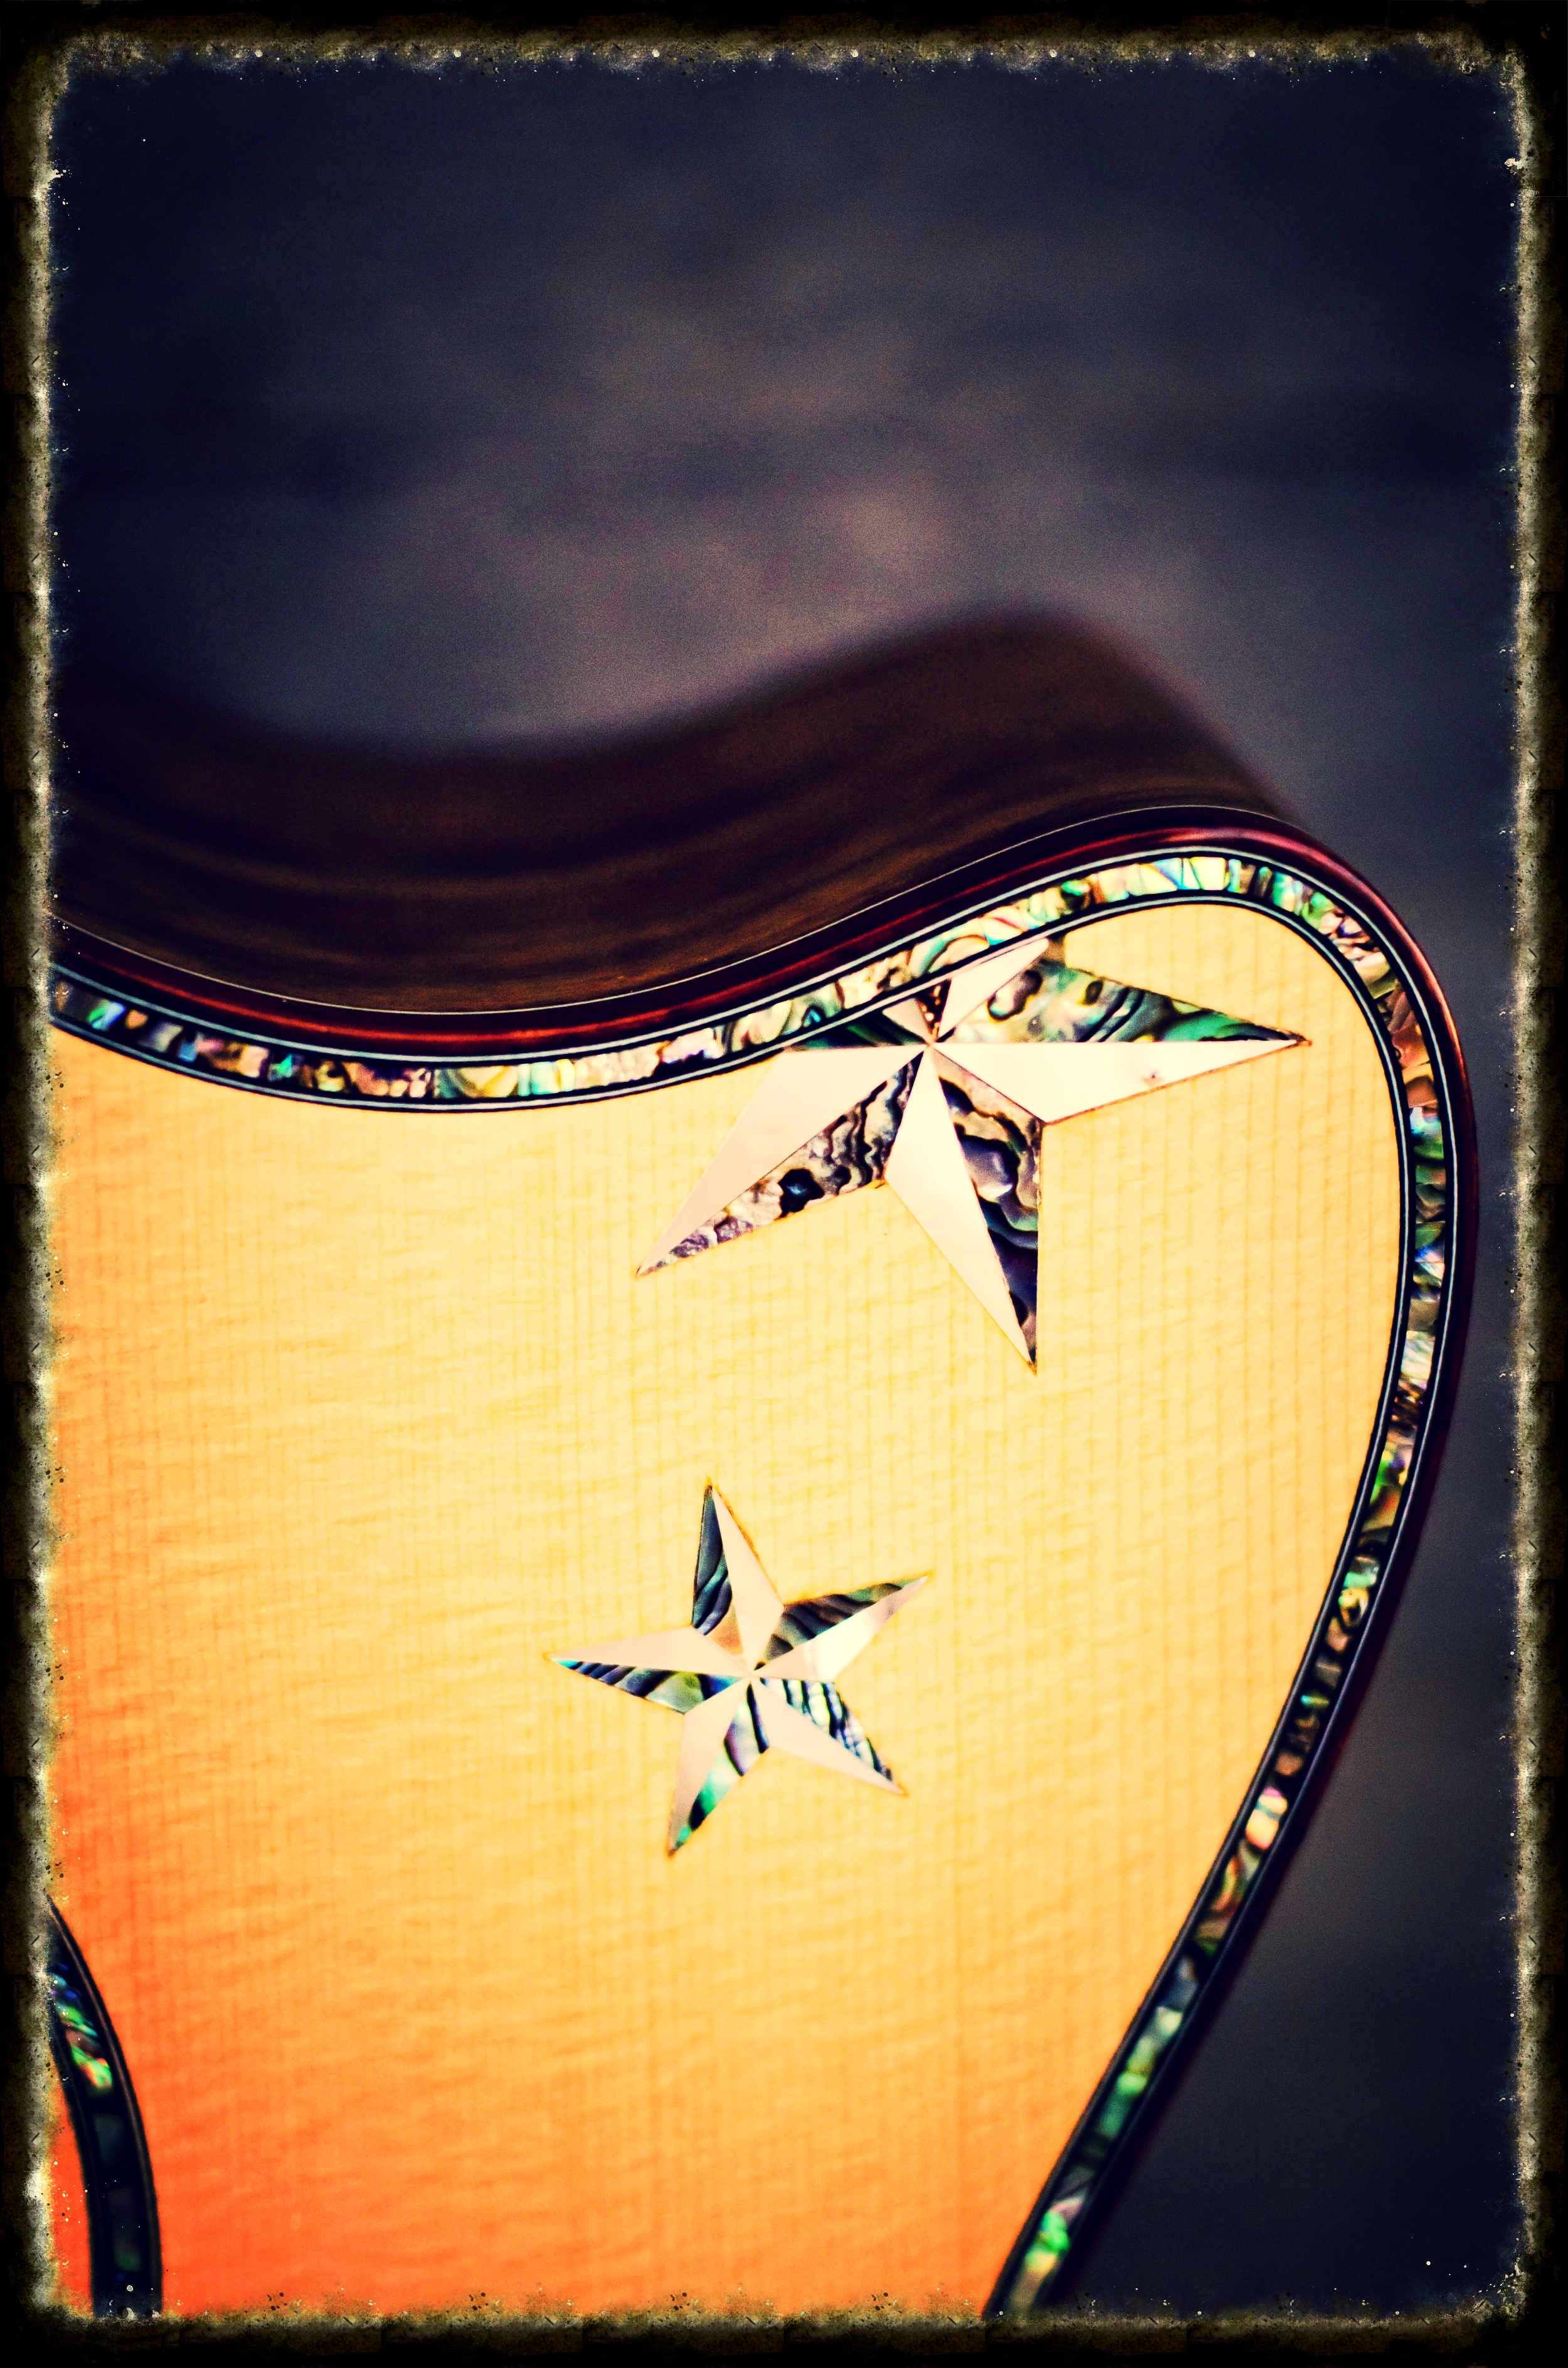  abalone stars inlaid on guitar top    